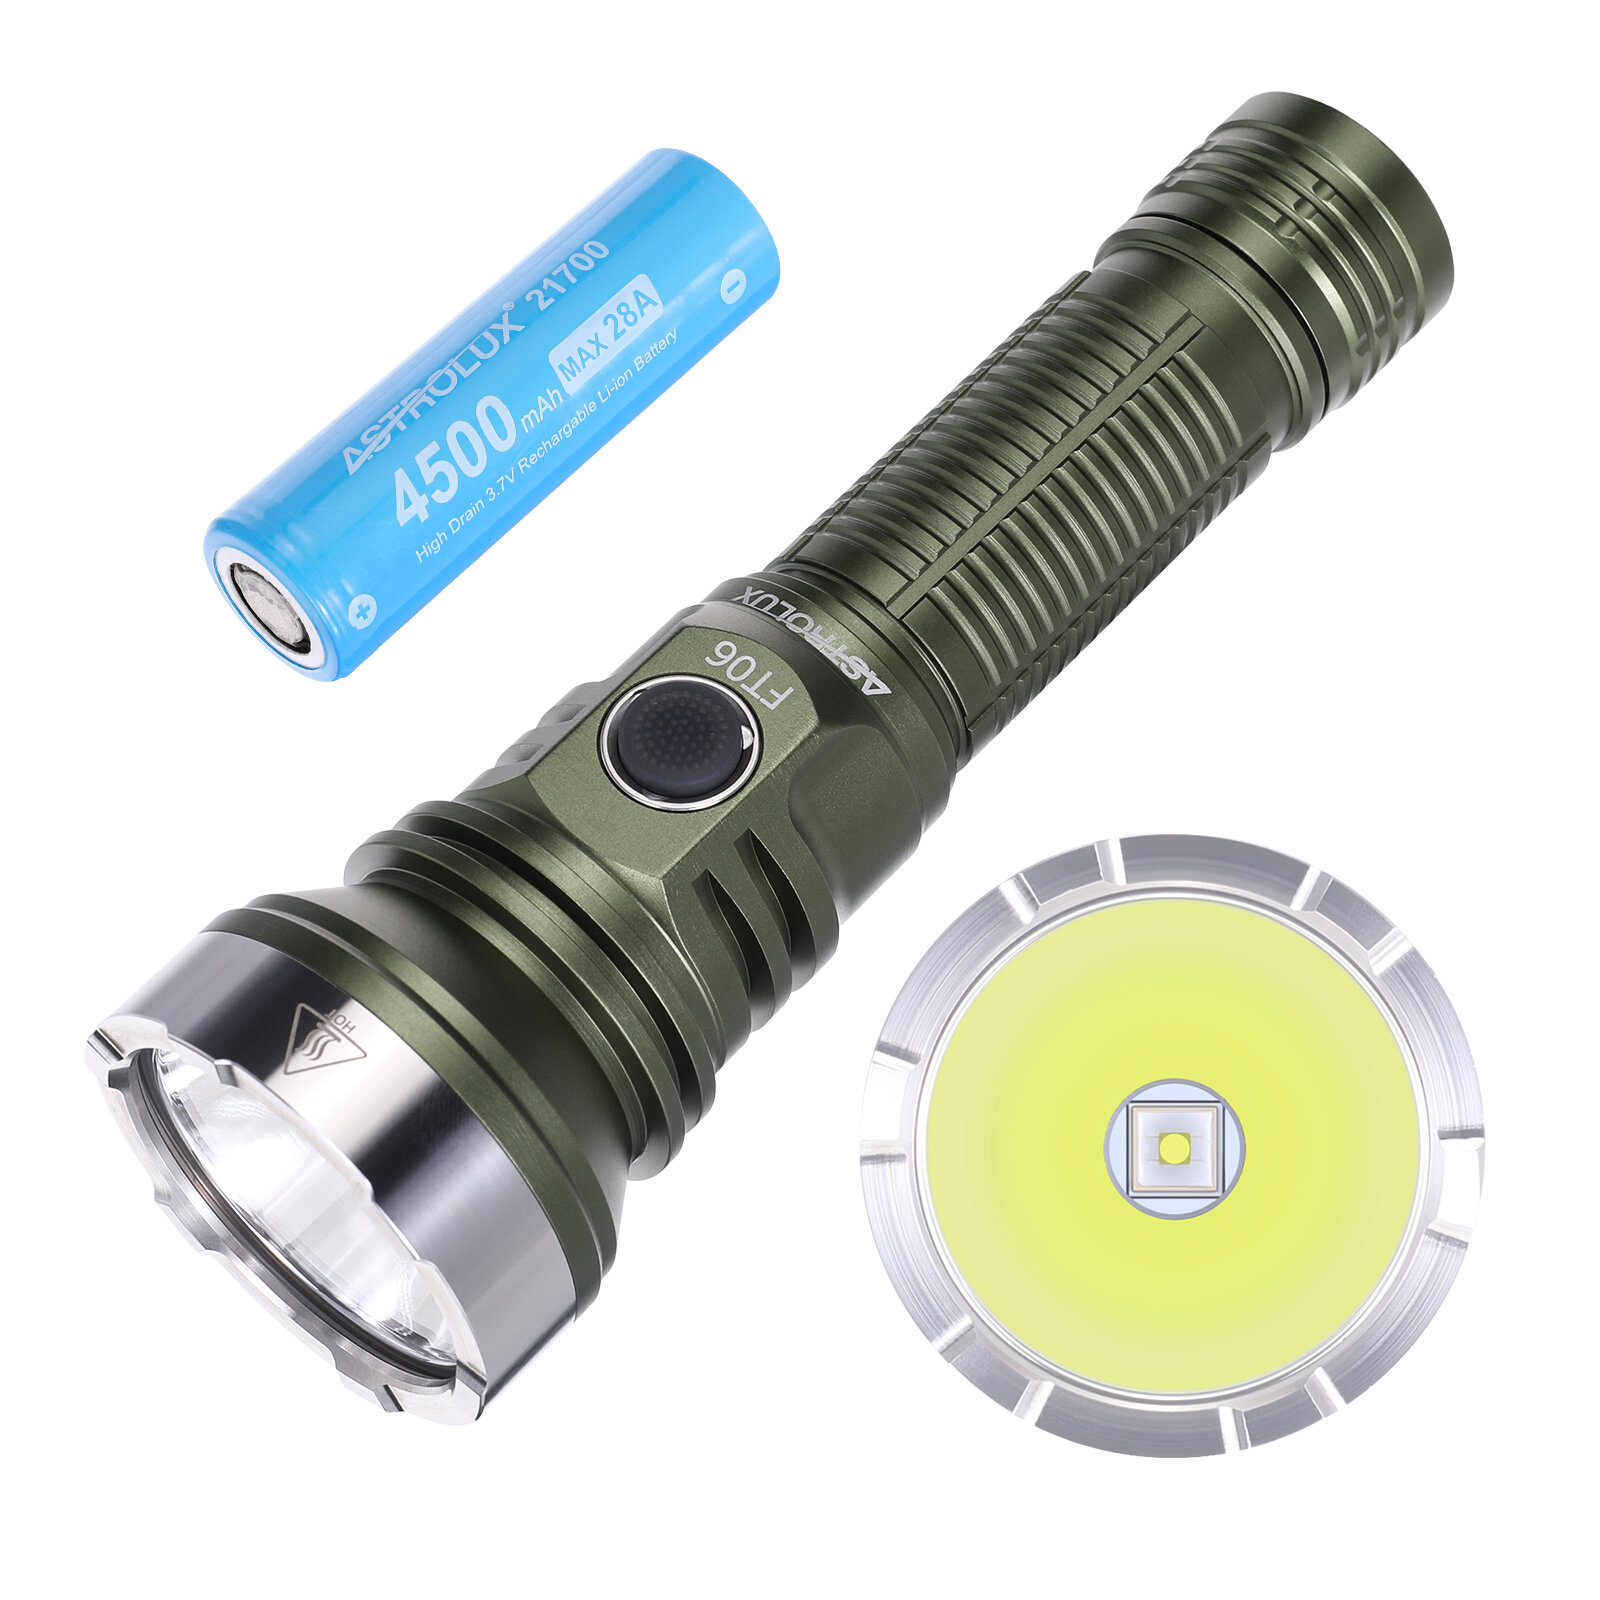 Astrolux® FT06 2850LM 1019M High Lumen Long Range LED Flashlight with 4500mAh Powerful 21700 Battery Stepless Dimming St